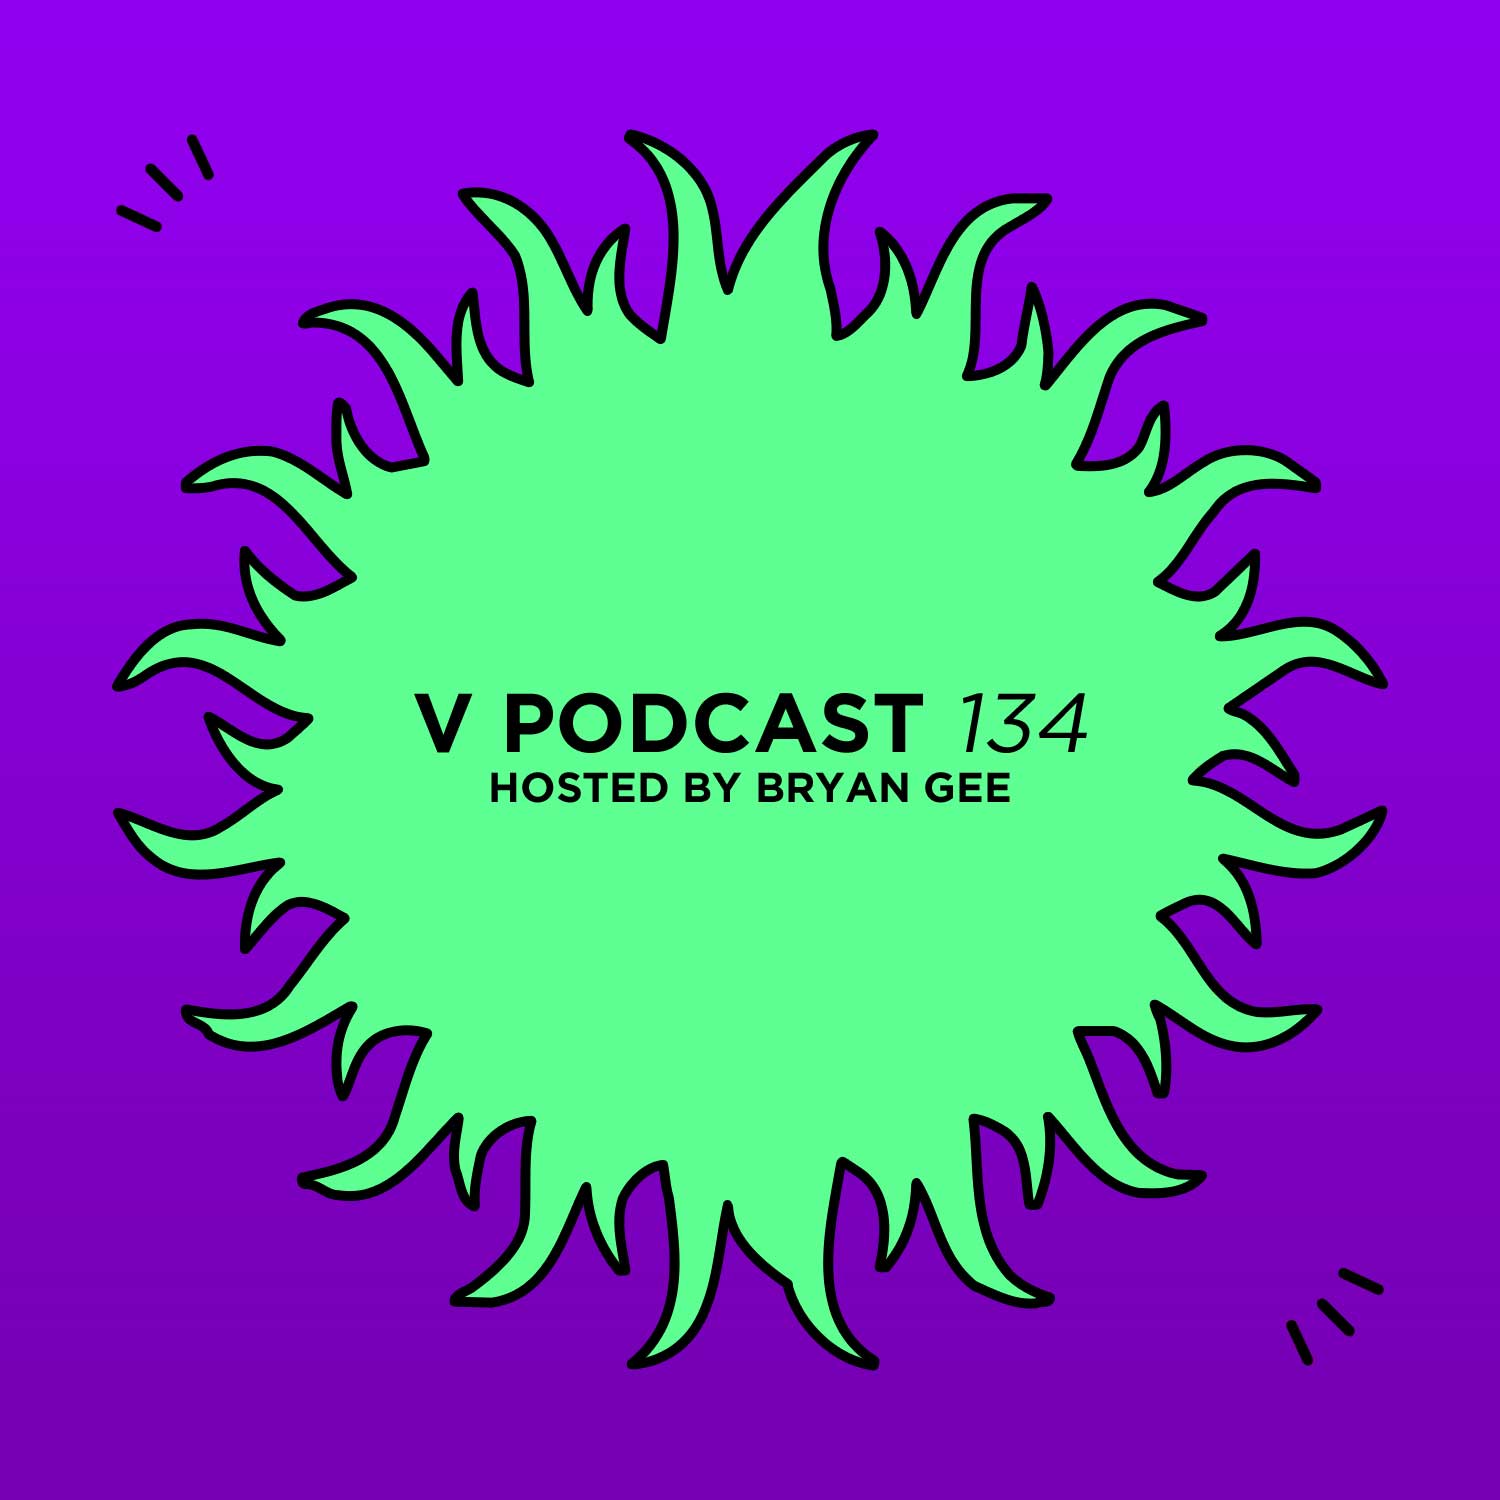 V Podcast 134 - Hosted by Bryan Gee Artwork